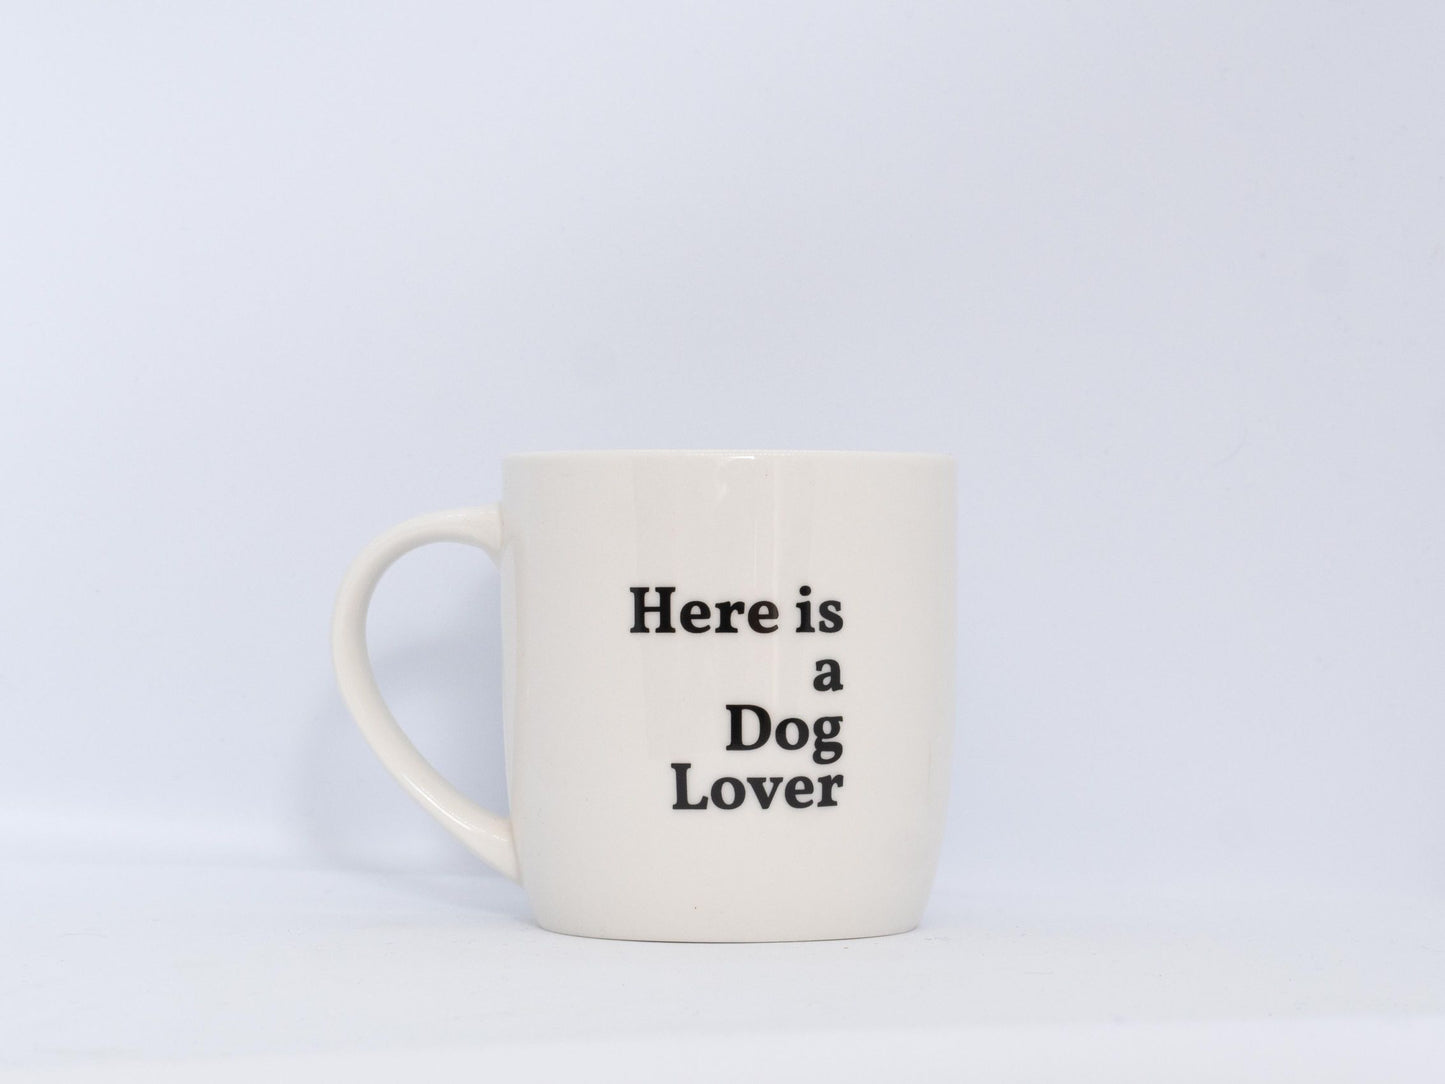 Tas/mok met quote 'here is a dog lover'